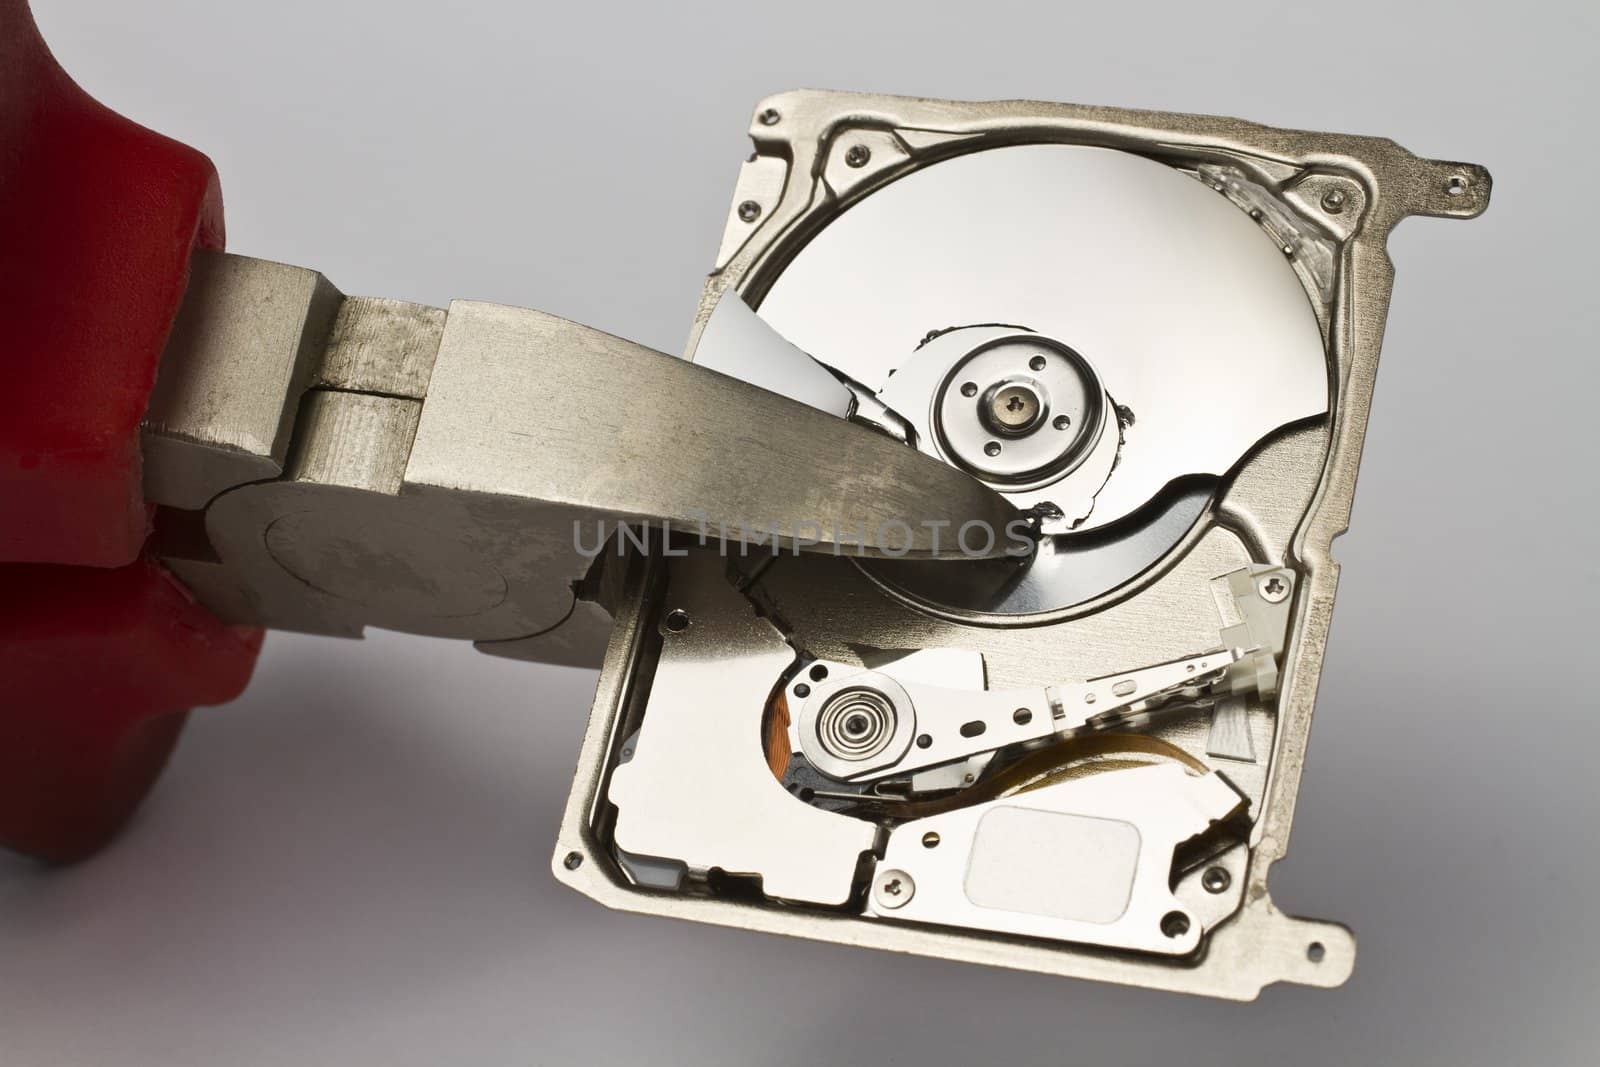 little hard disk drive cutted by side cutter